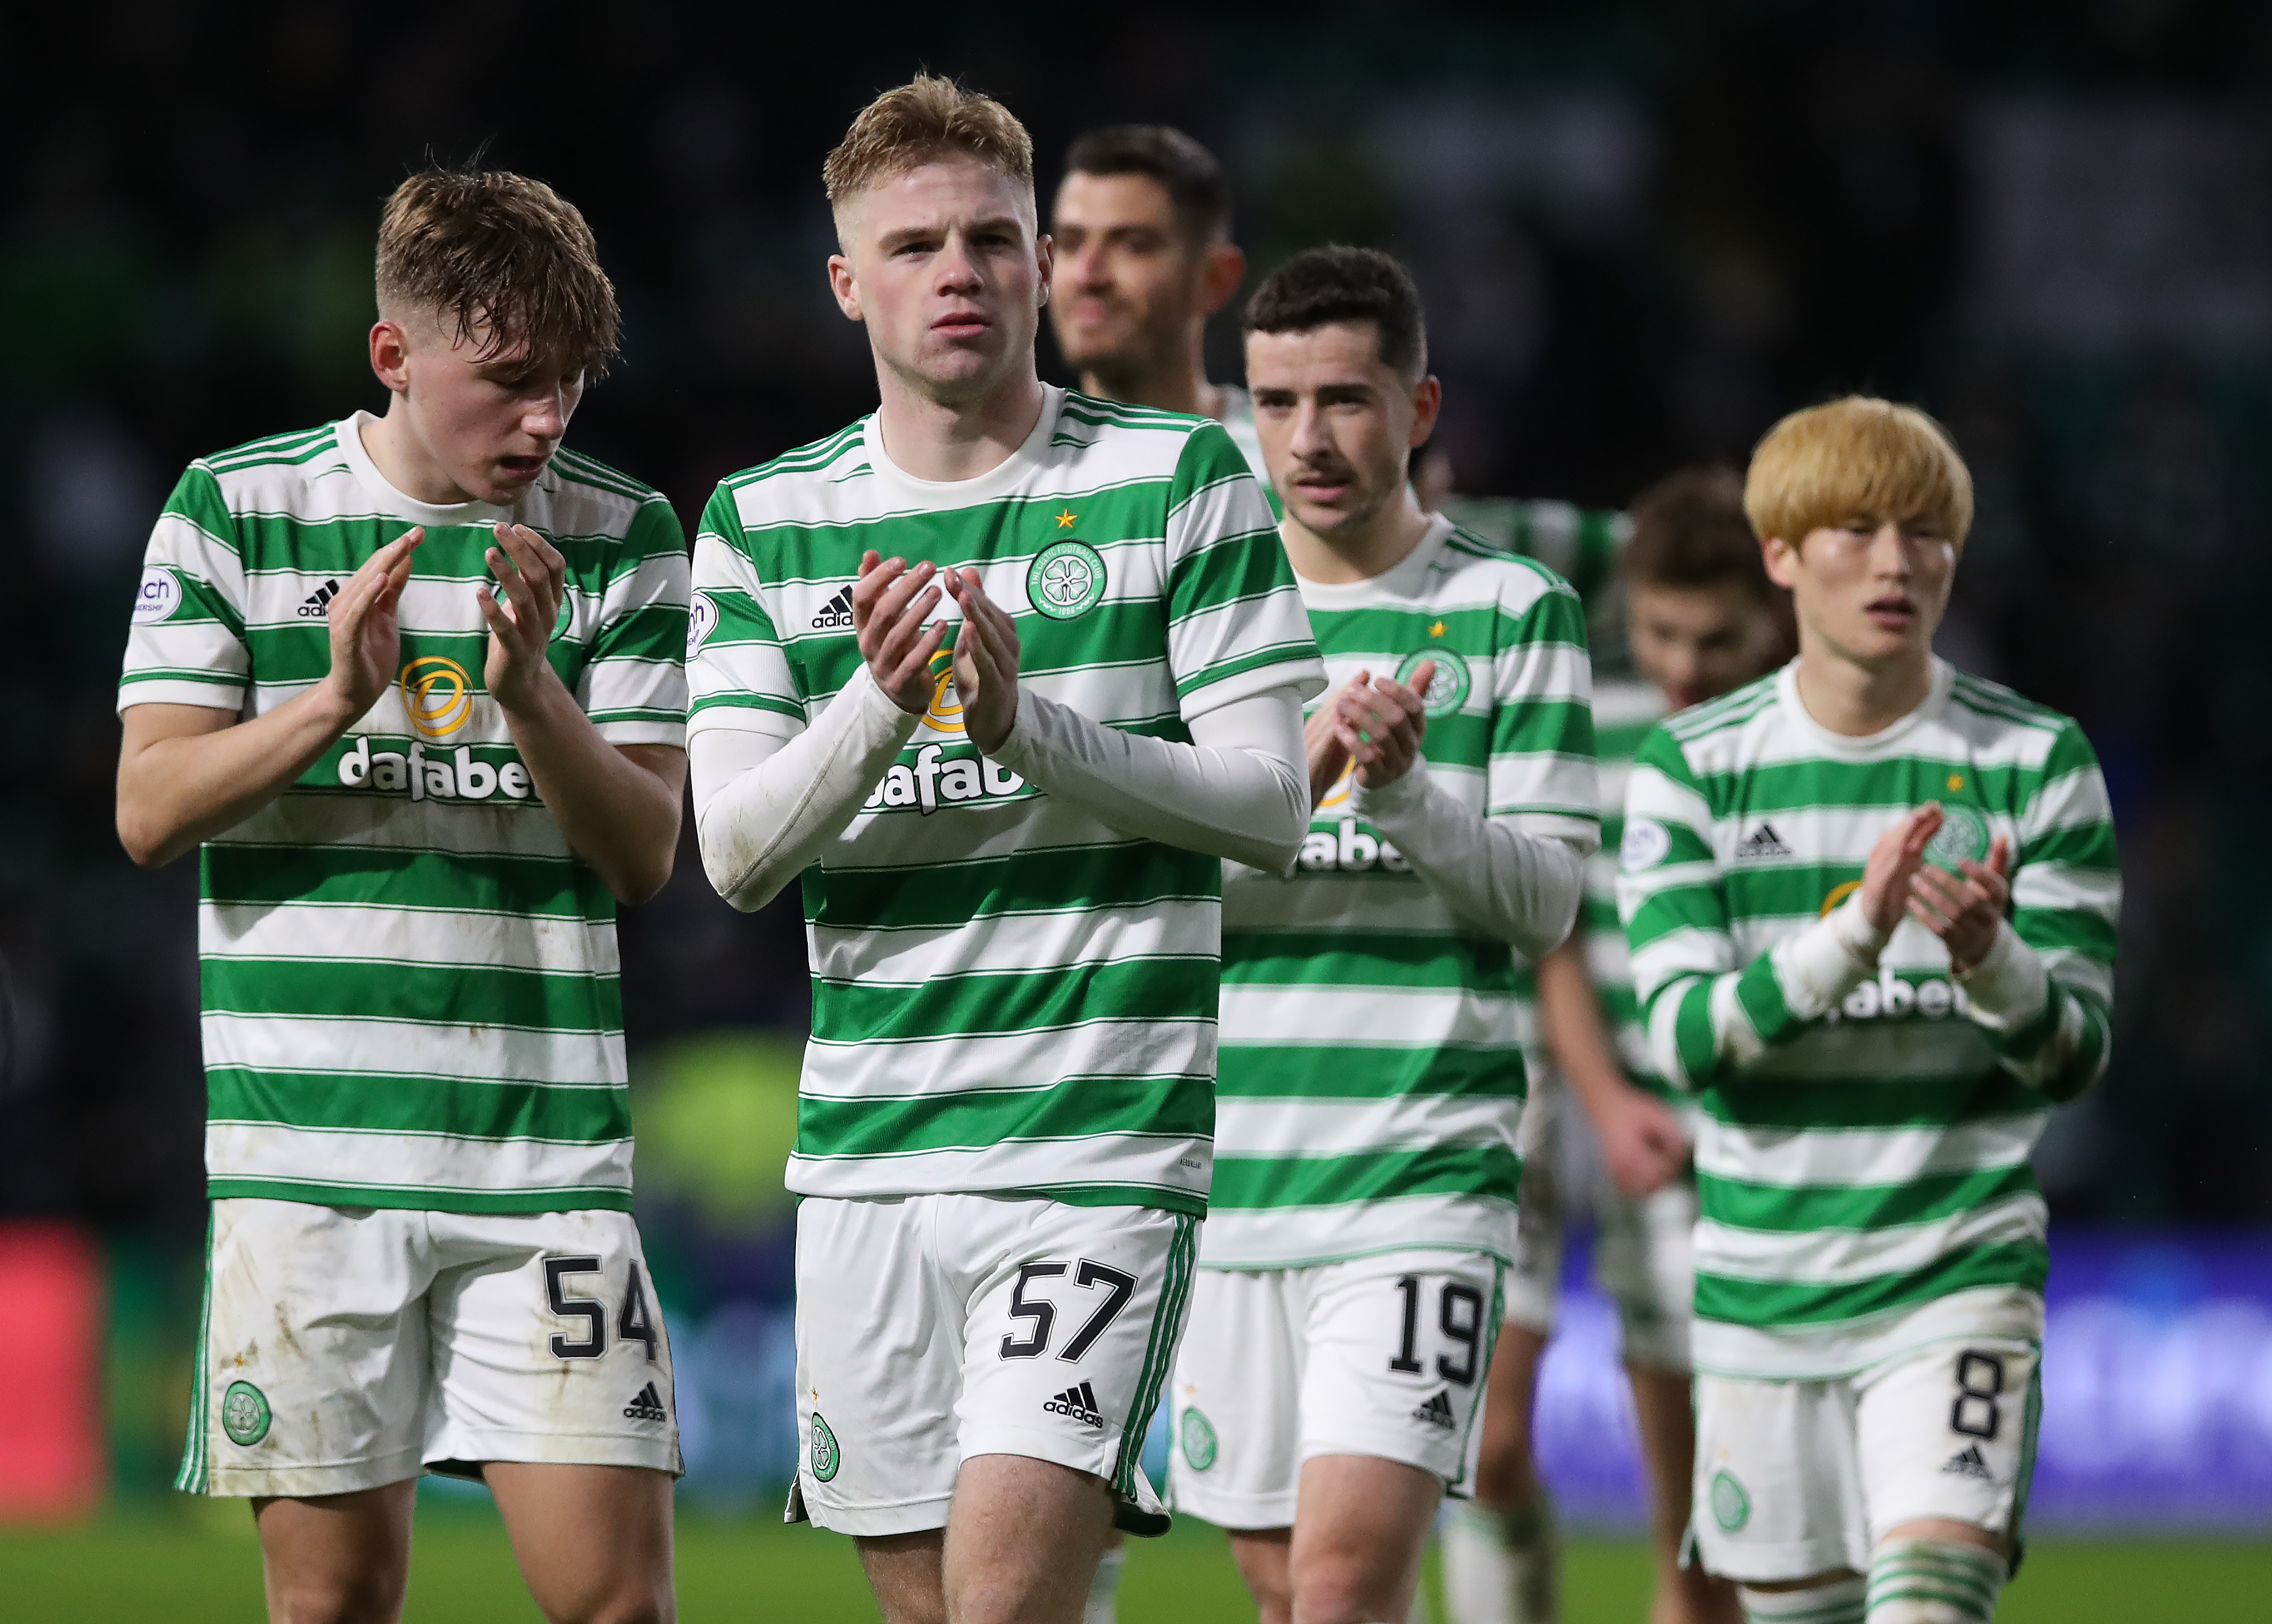 This was a great game of football, but Celtic must score more goals